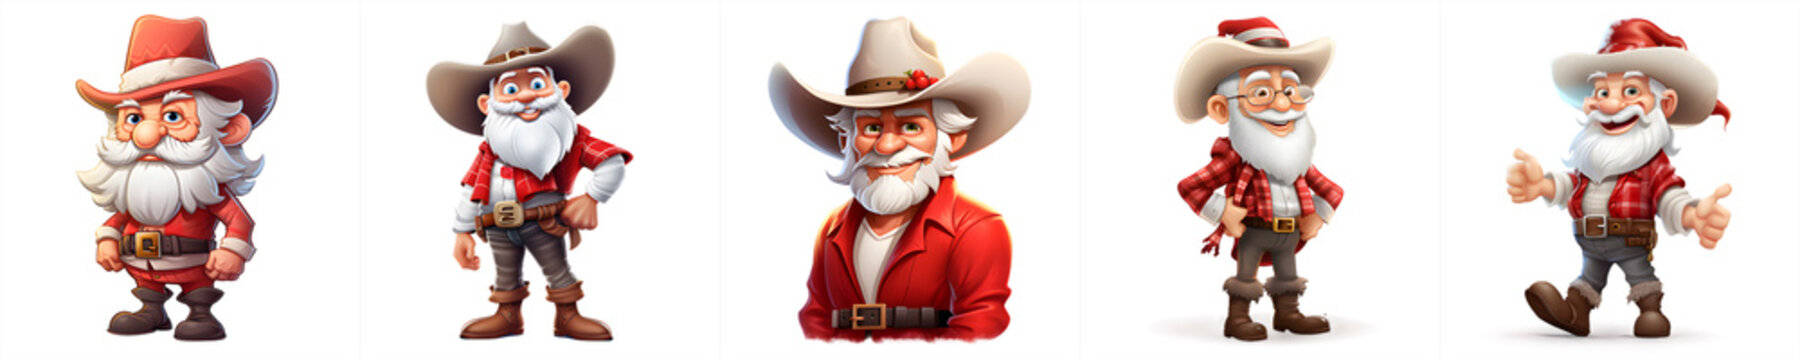 cowboy christmas collection, isolated on transparent background